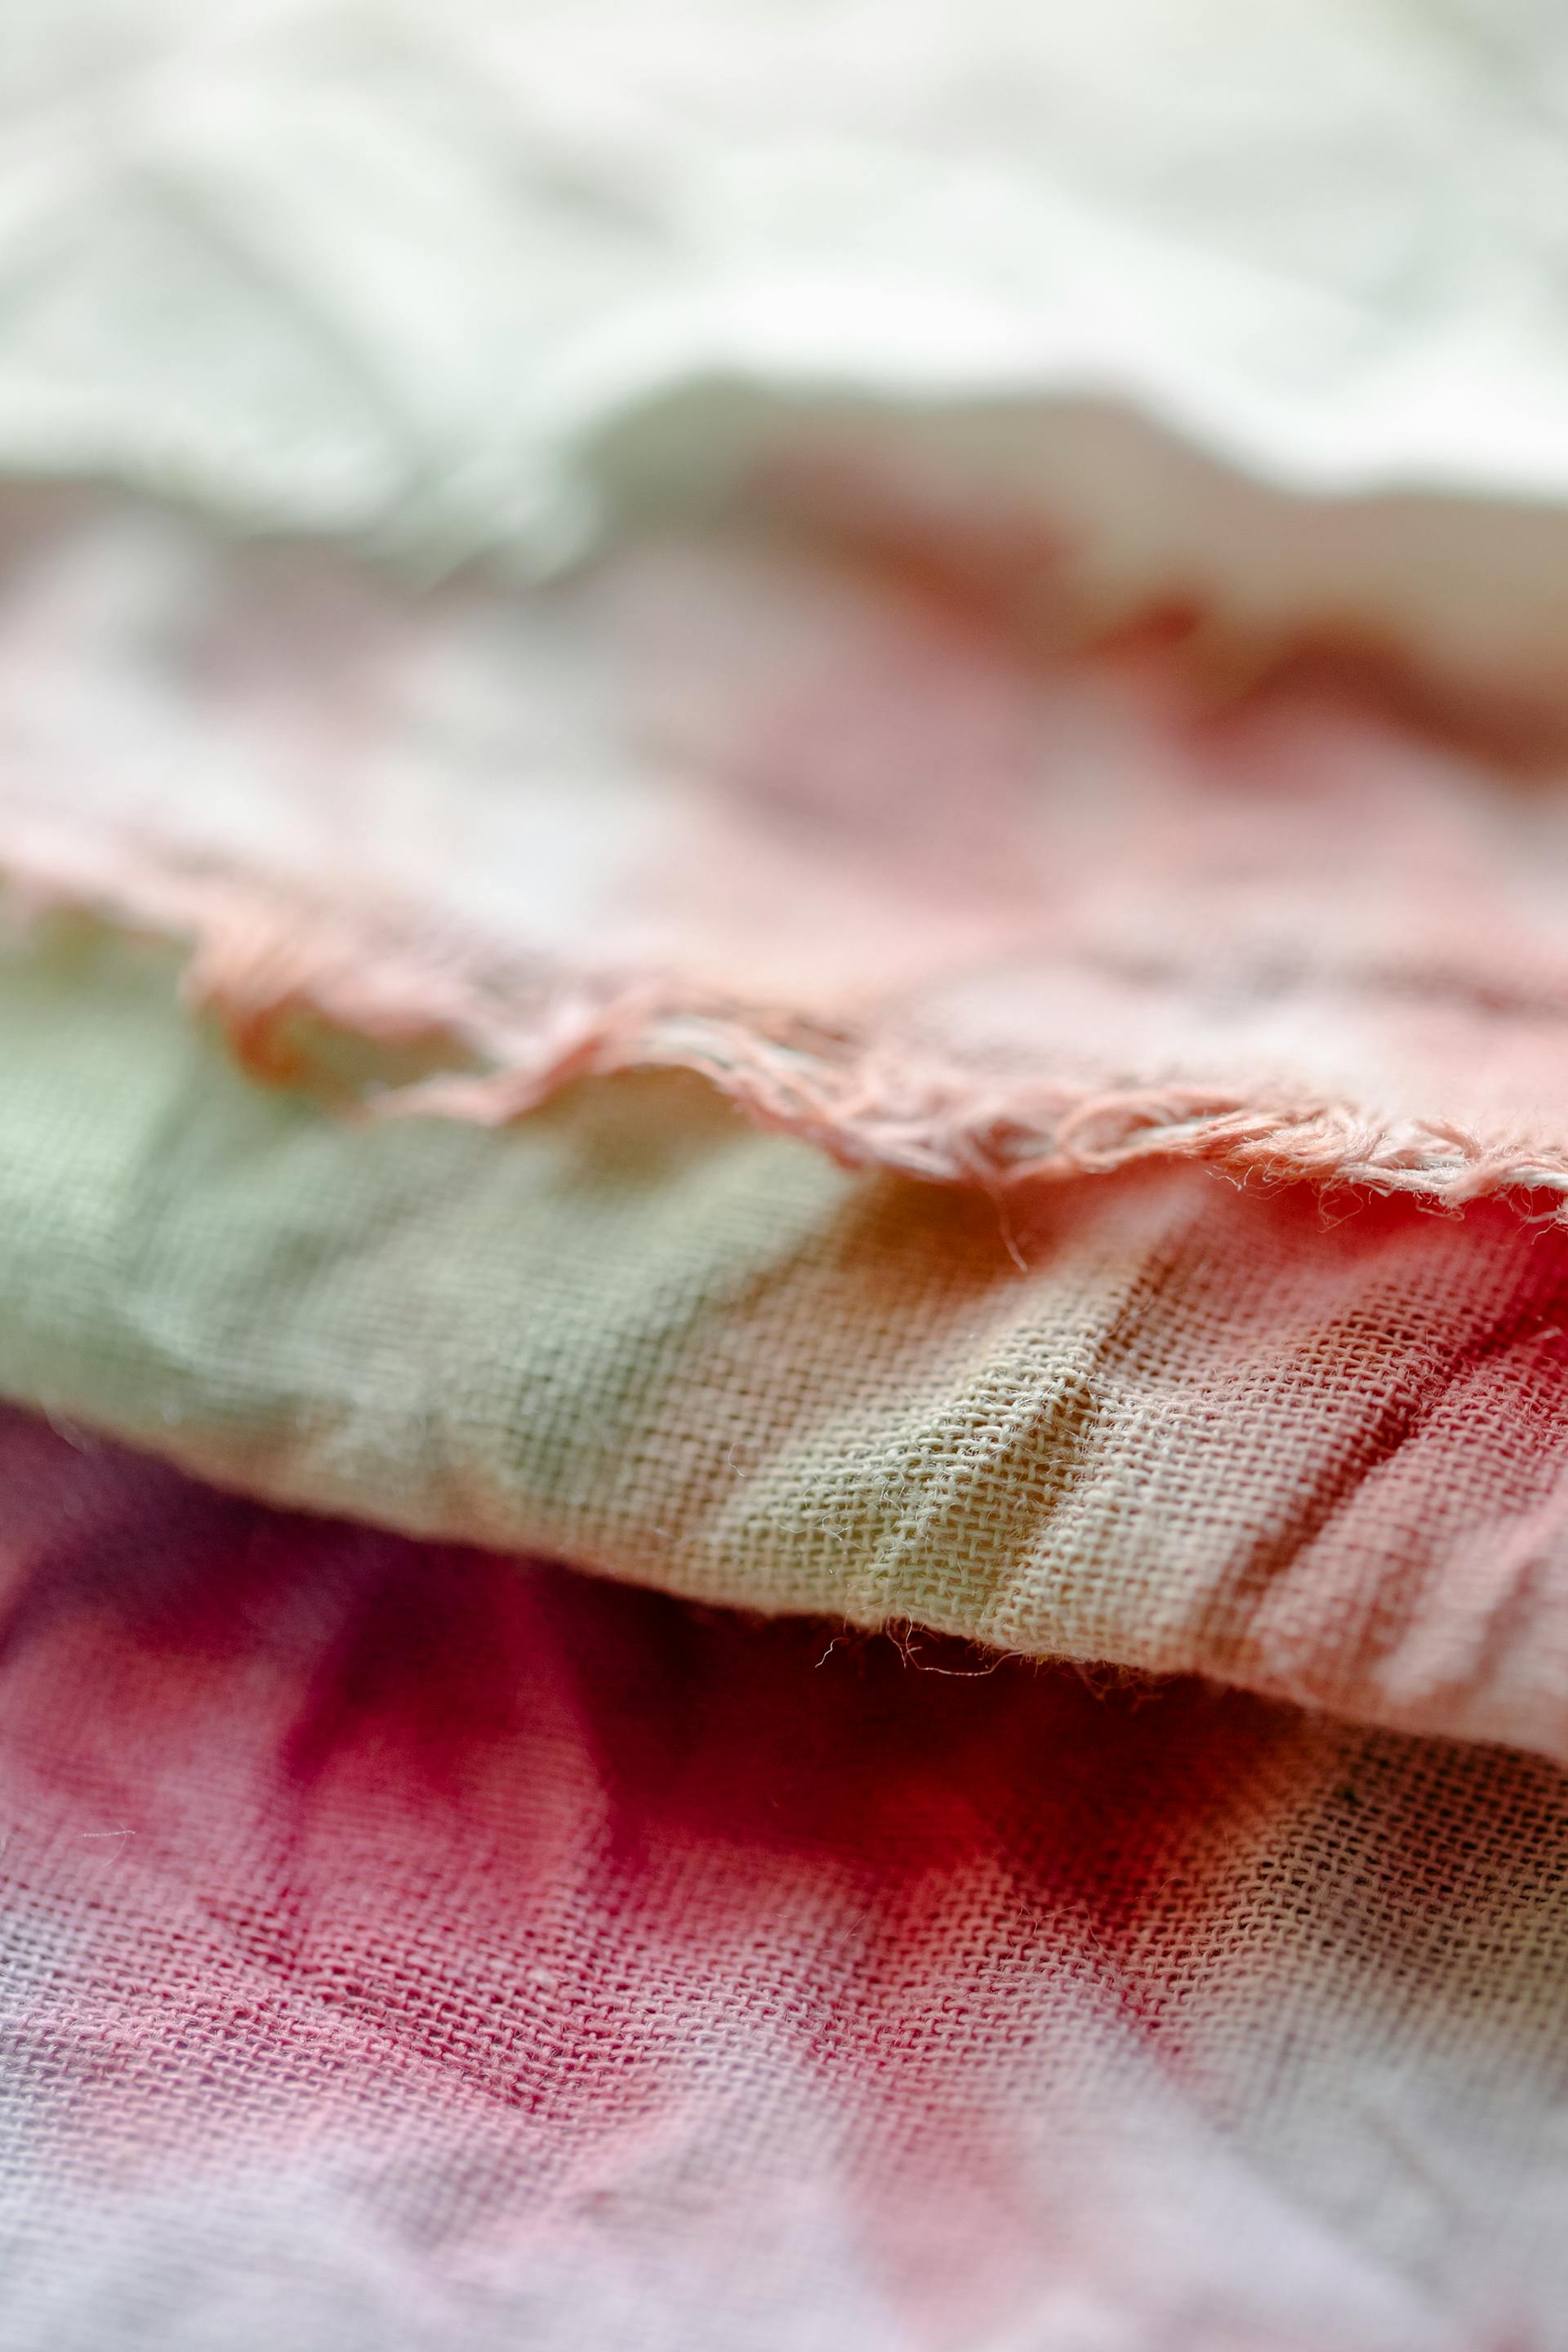 Colored fabric | Source: Pexels